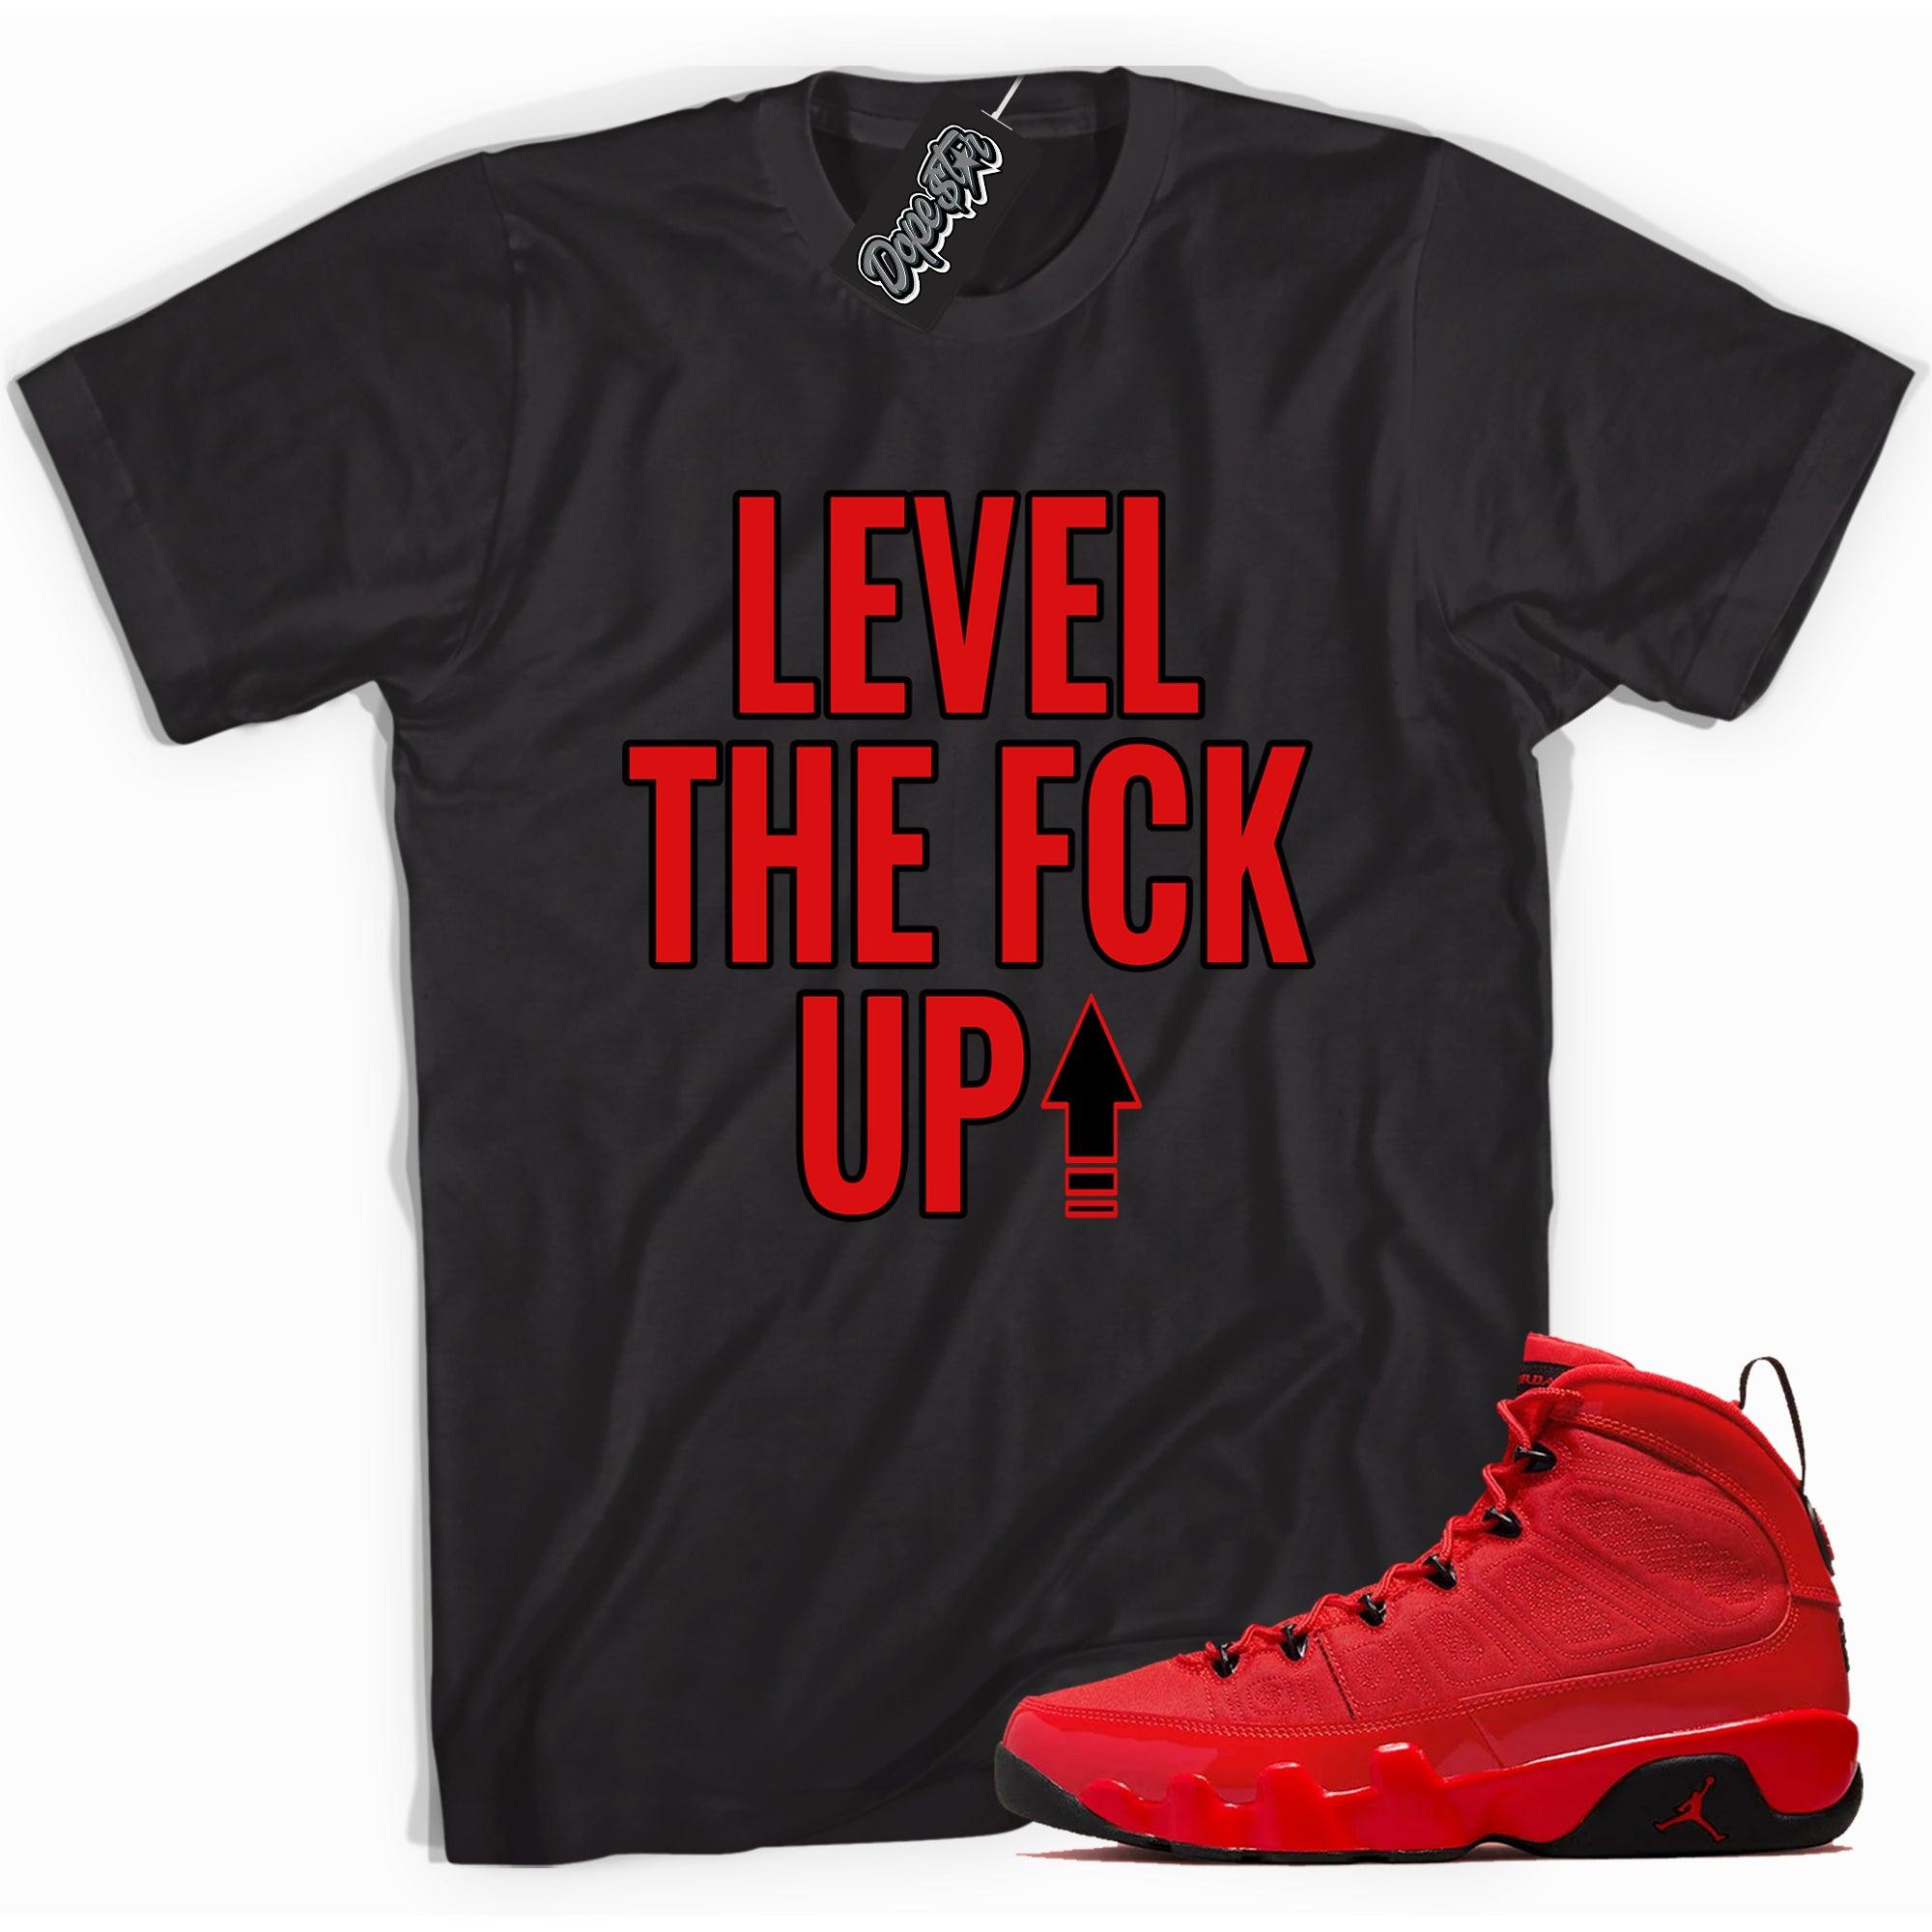 Cool black graphic tee with 'Level Up' print, that perfectly matches Air Jordan 9 Retro Chile Red sneakers.